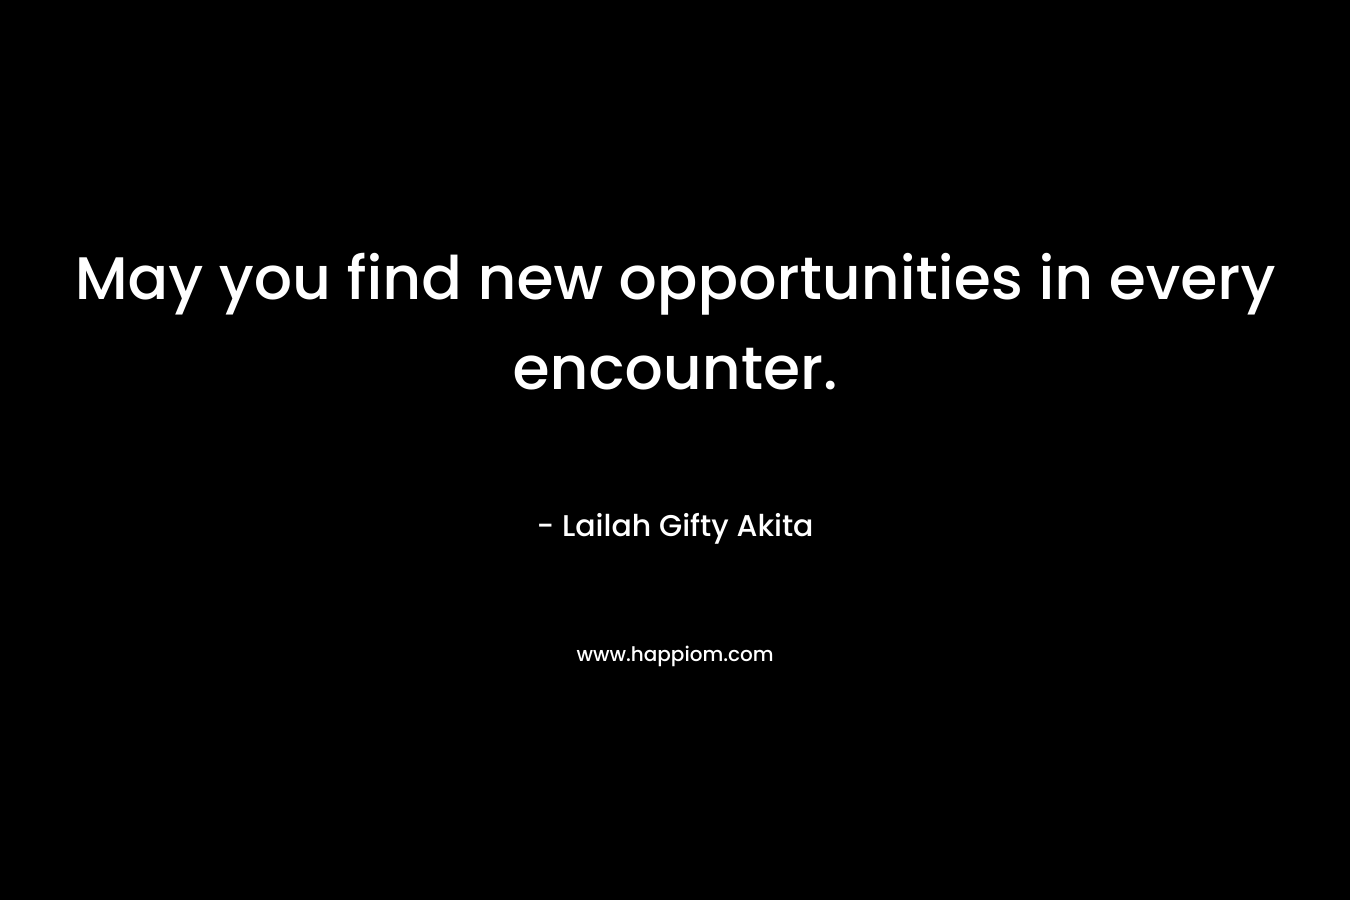 May you find new opportunities in every encounter.